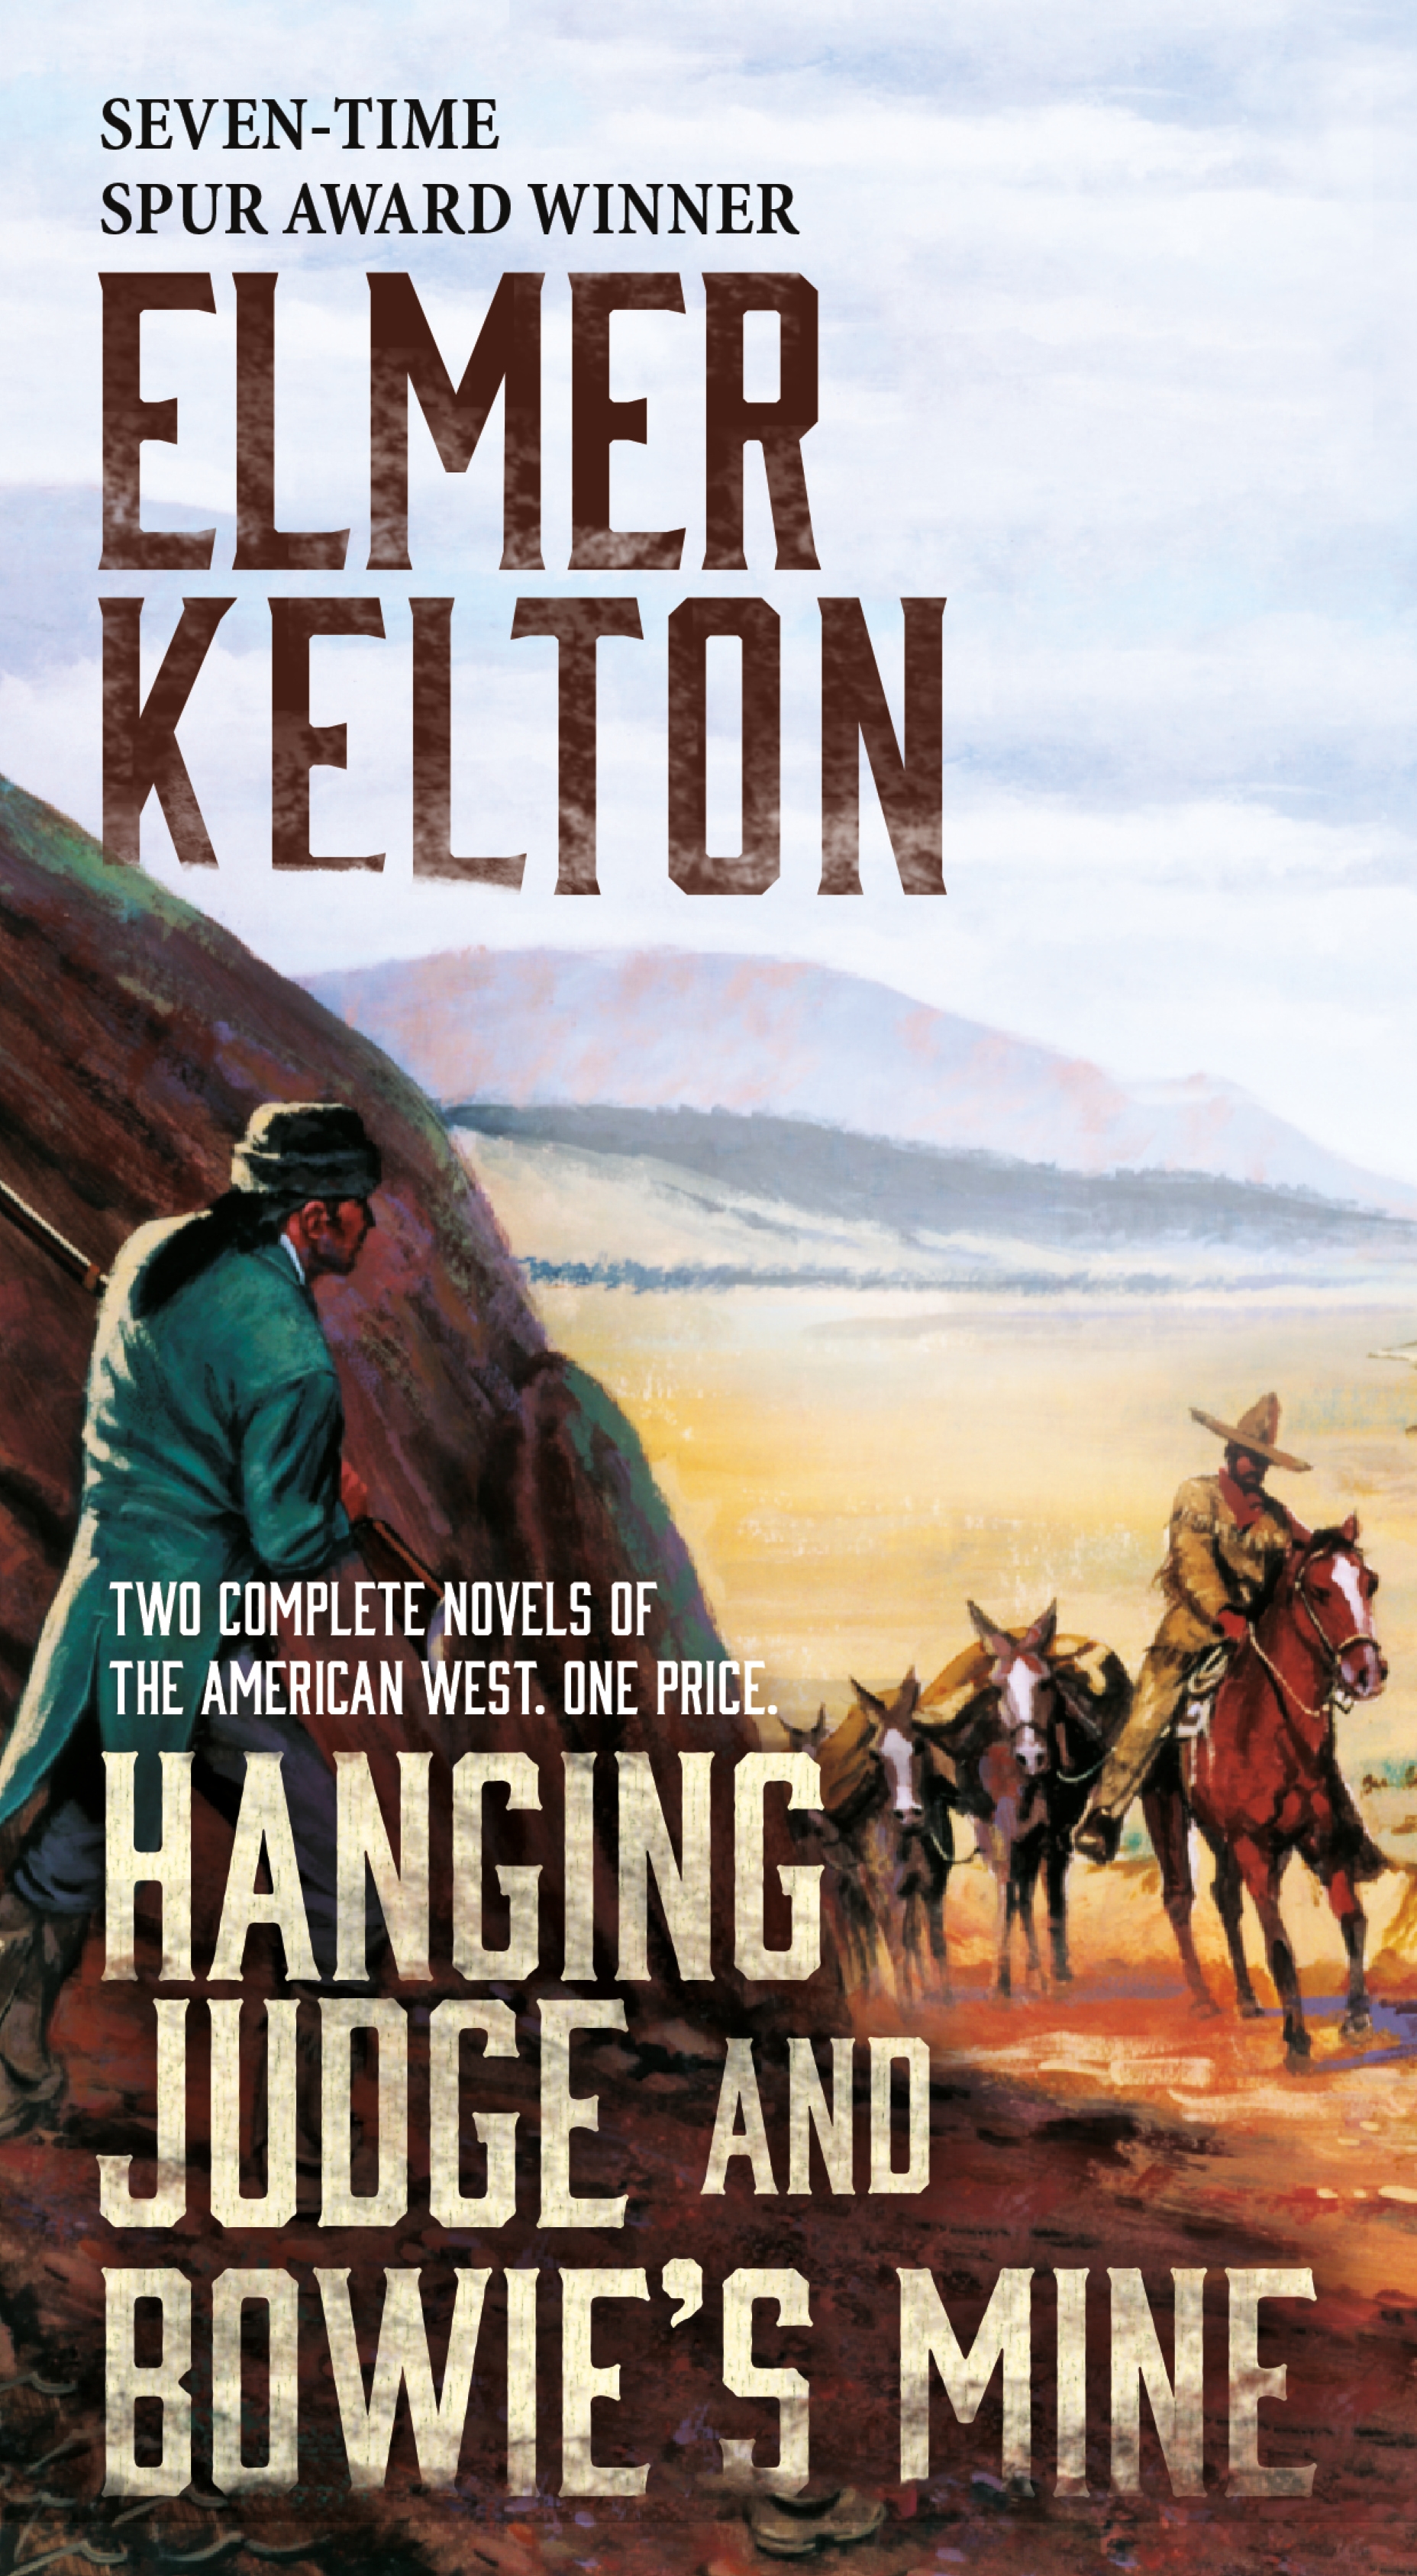 Hanging Judge and Bowie's Mine : Two Complete Novels of the American West by Elmer Kelton